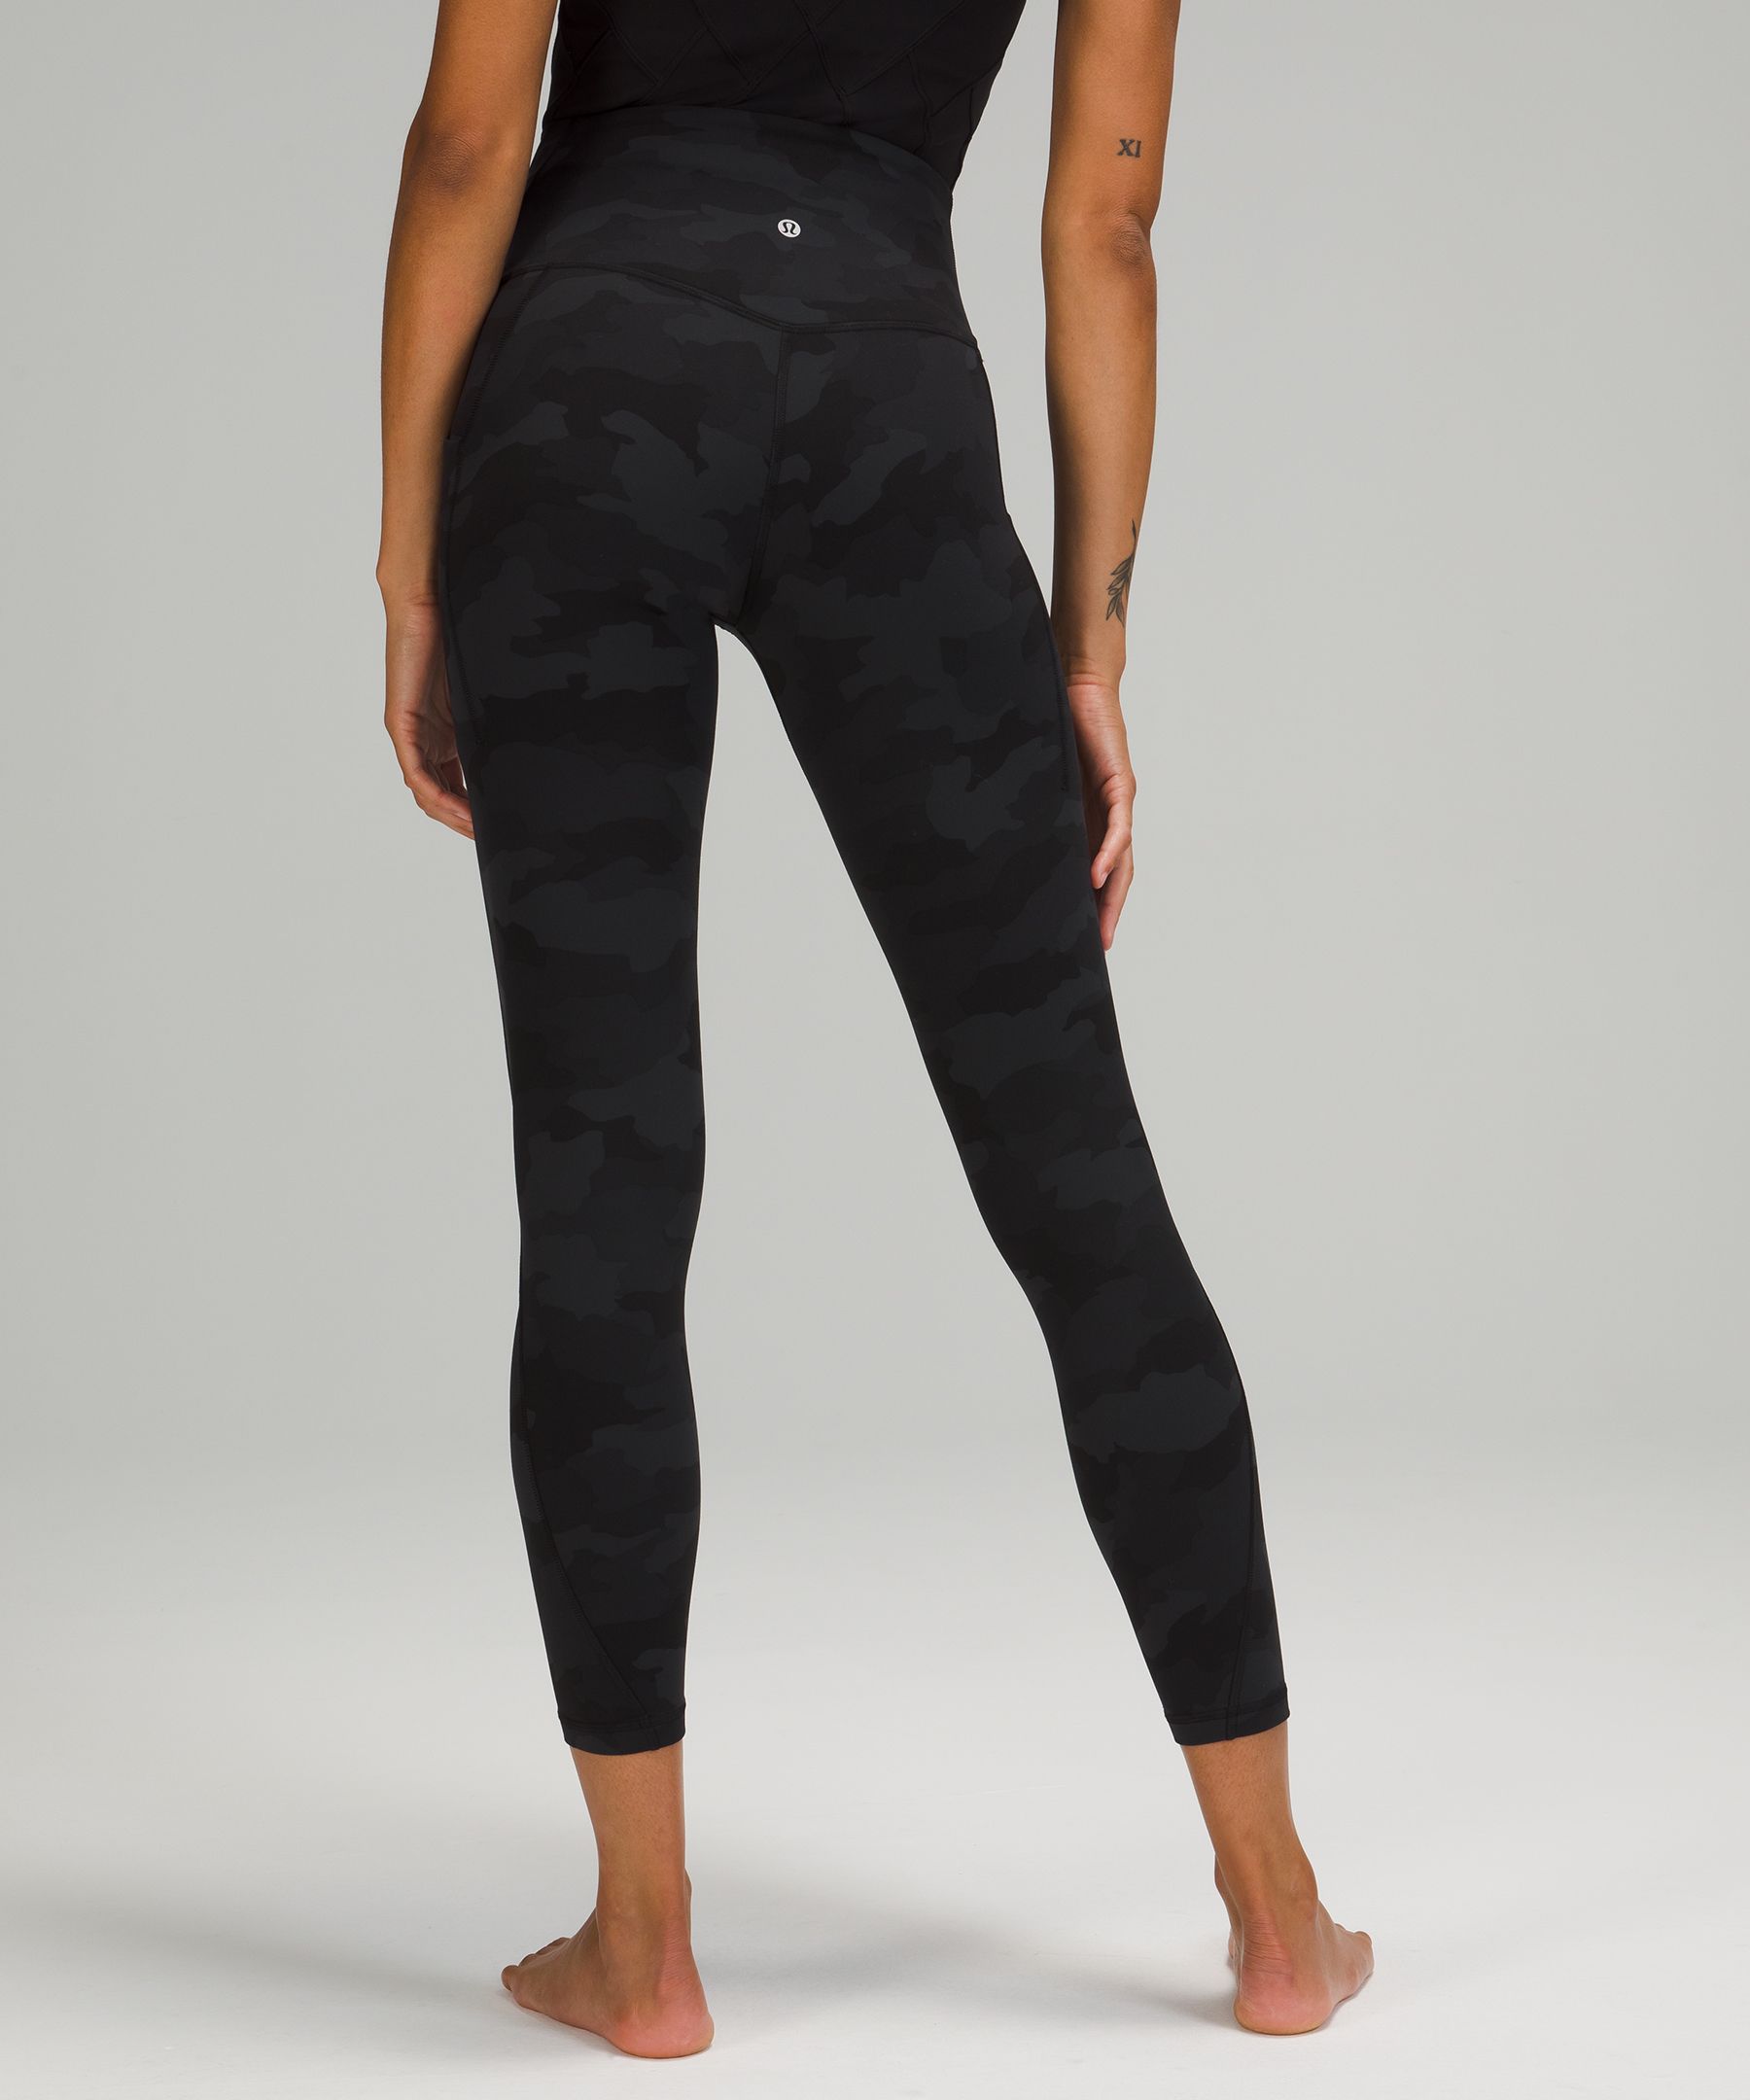 NWT lululemon Align™ High-Rise Pant with Pockets 25 SIZE 4.6.8 